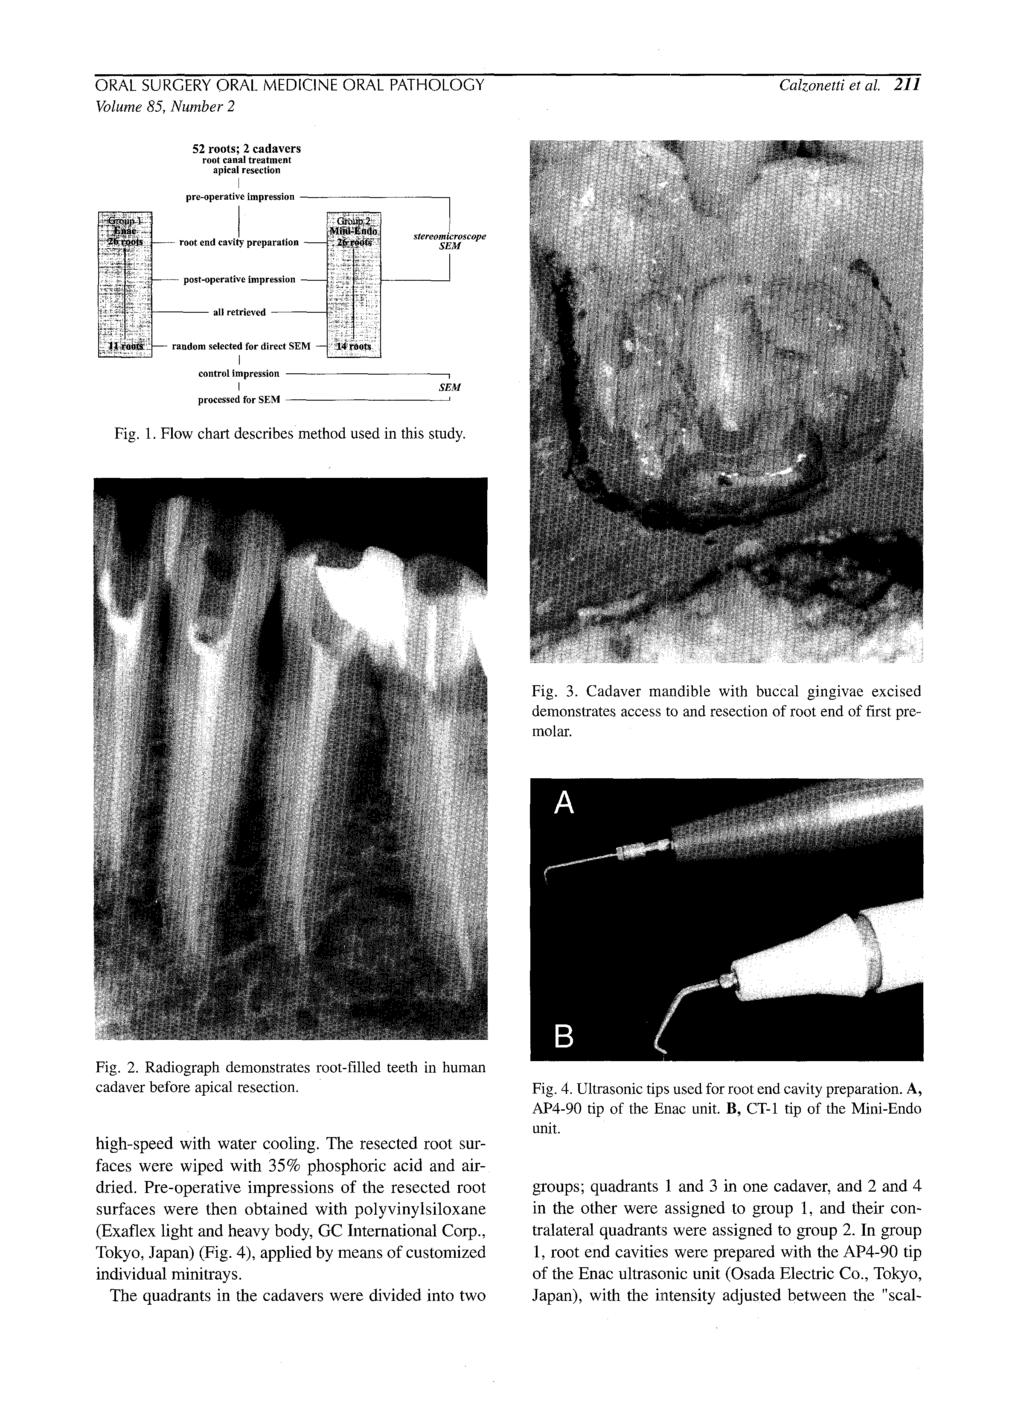 ORAL SURGERY ORAL MEDICINE ORAL PATHOLOGY Calzonetti et al. 211 Volume 85, Number 2 52 roots; 2 cadavers root canal treatment apical resection I pre-operative[ impression z "'- ~1,~.